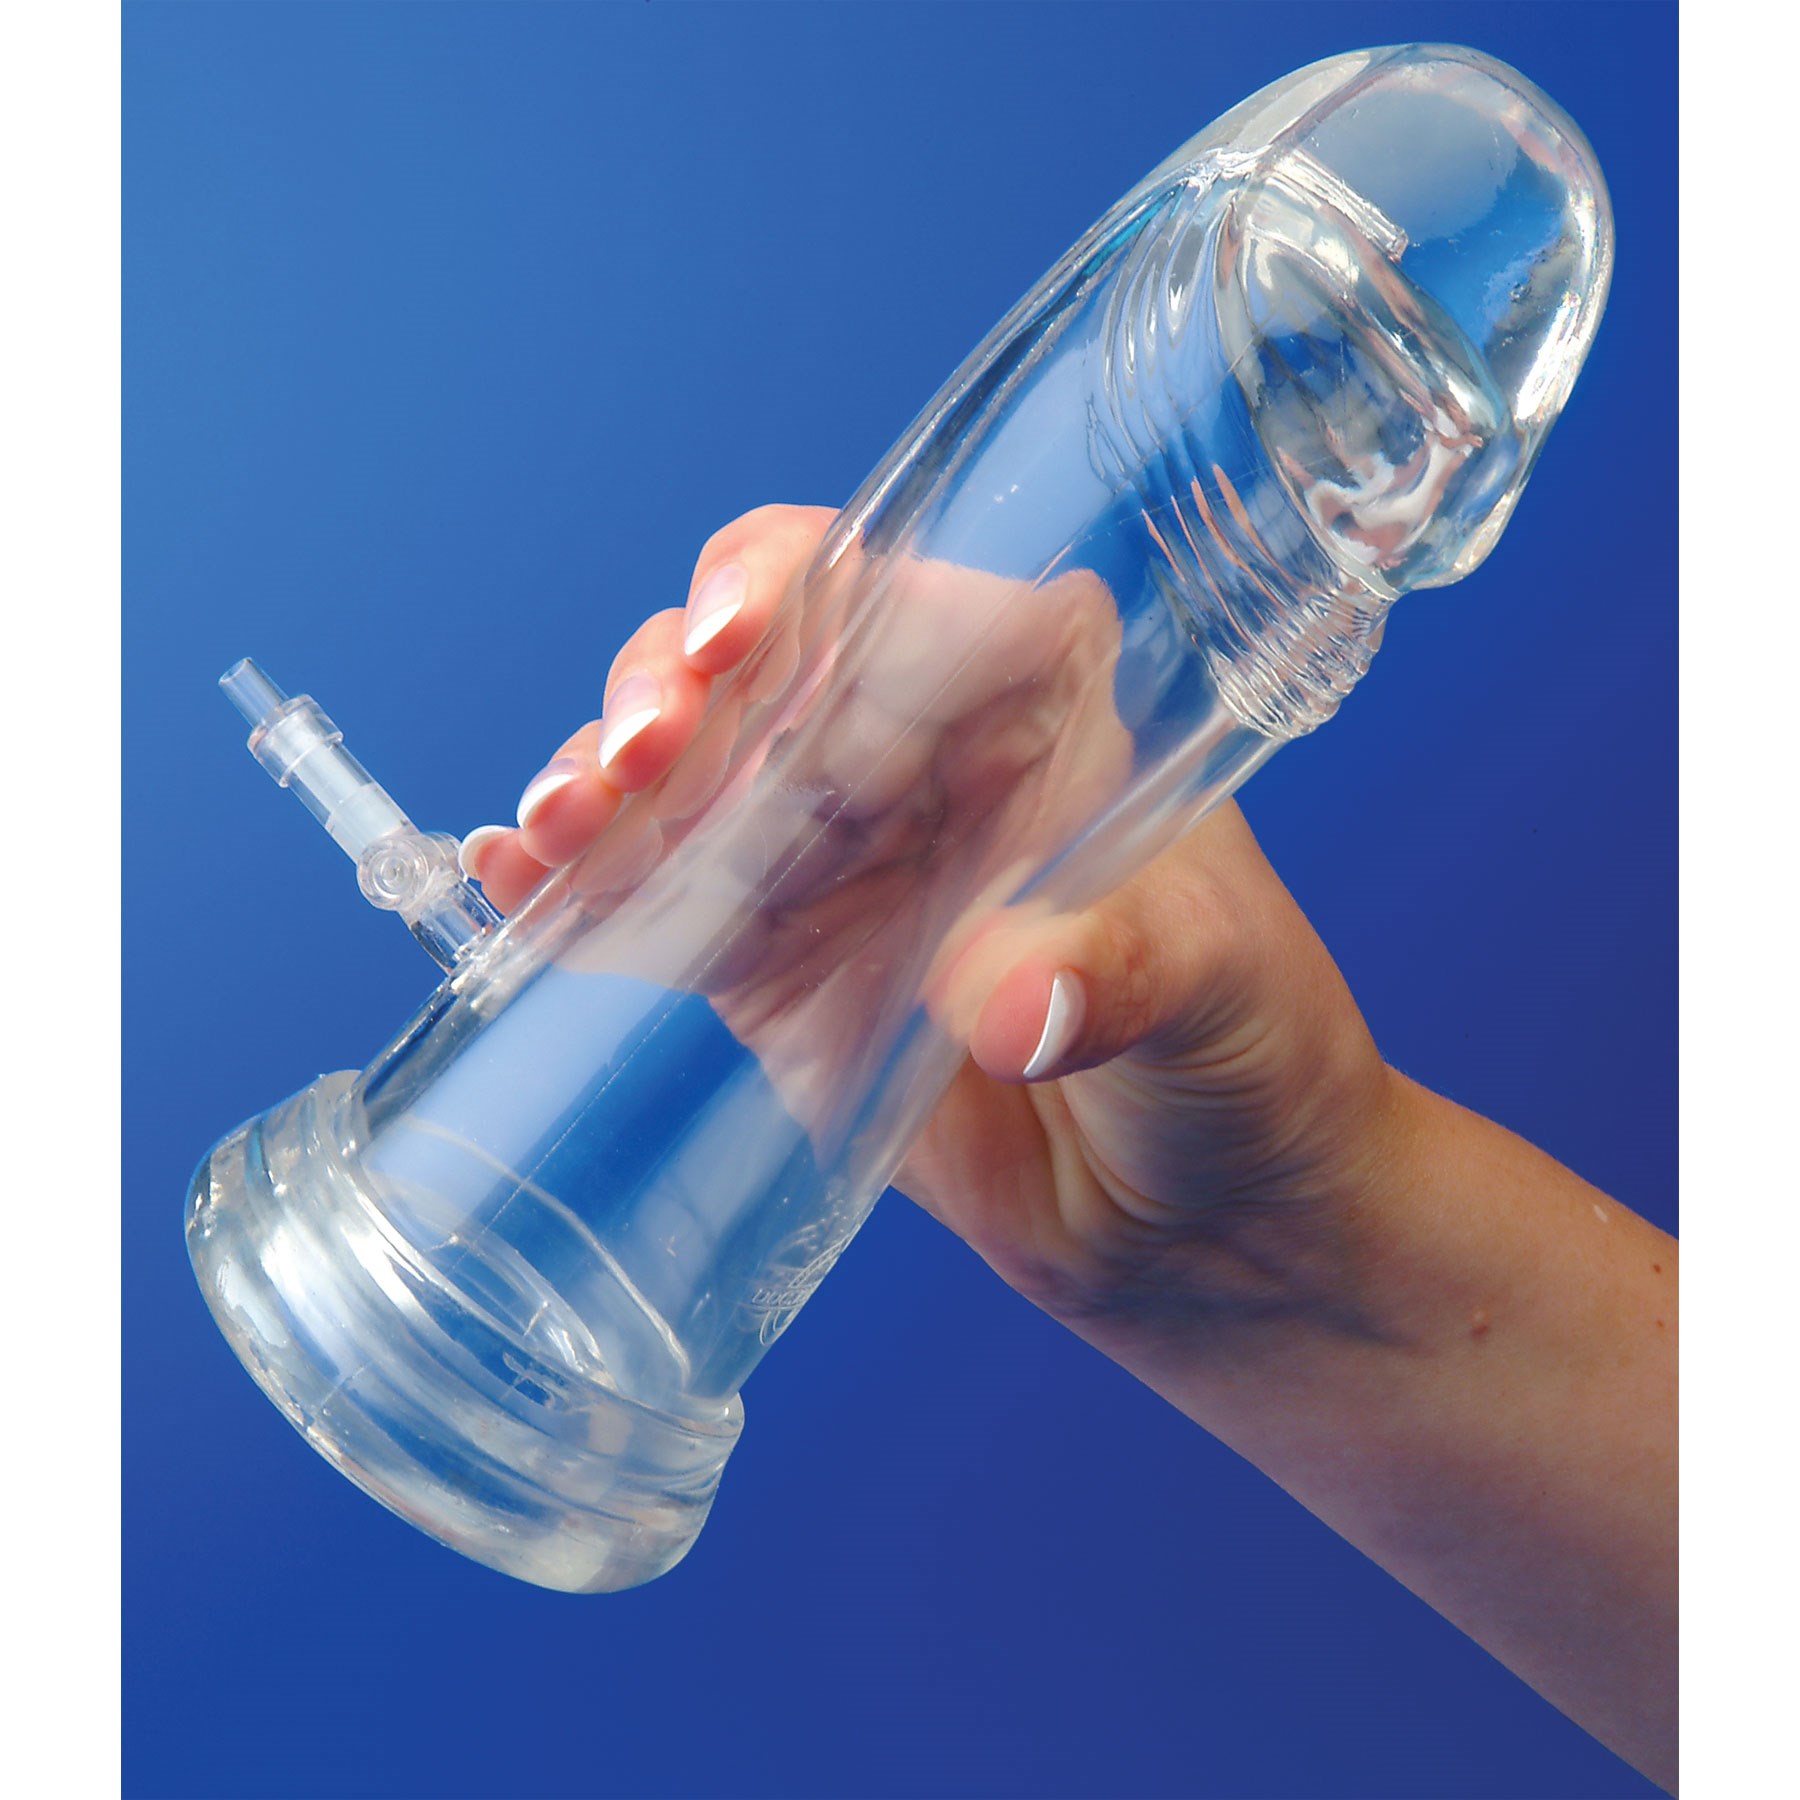 P3 Pliable Penis Pump hand holding for scale